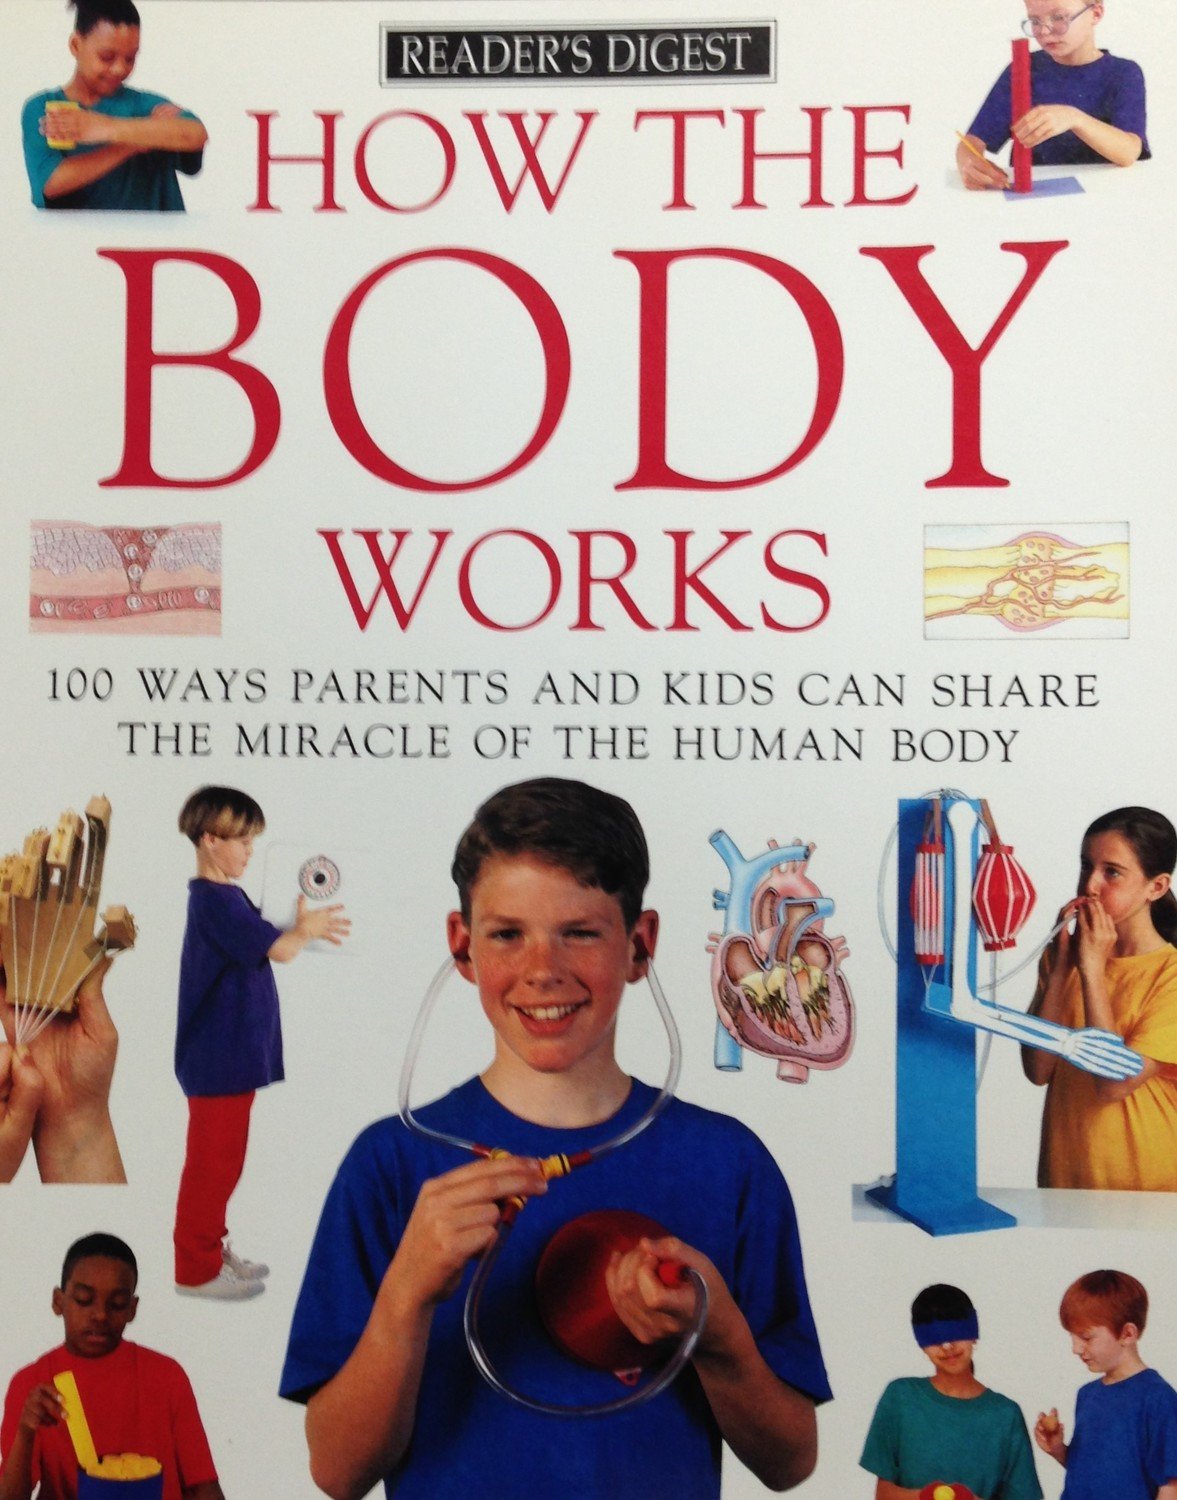 Reader's Digest How the Body Works:  100 Ways Parents and Kids Can Share the Miracle of the Human Body